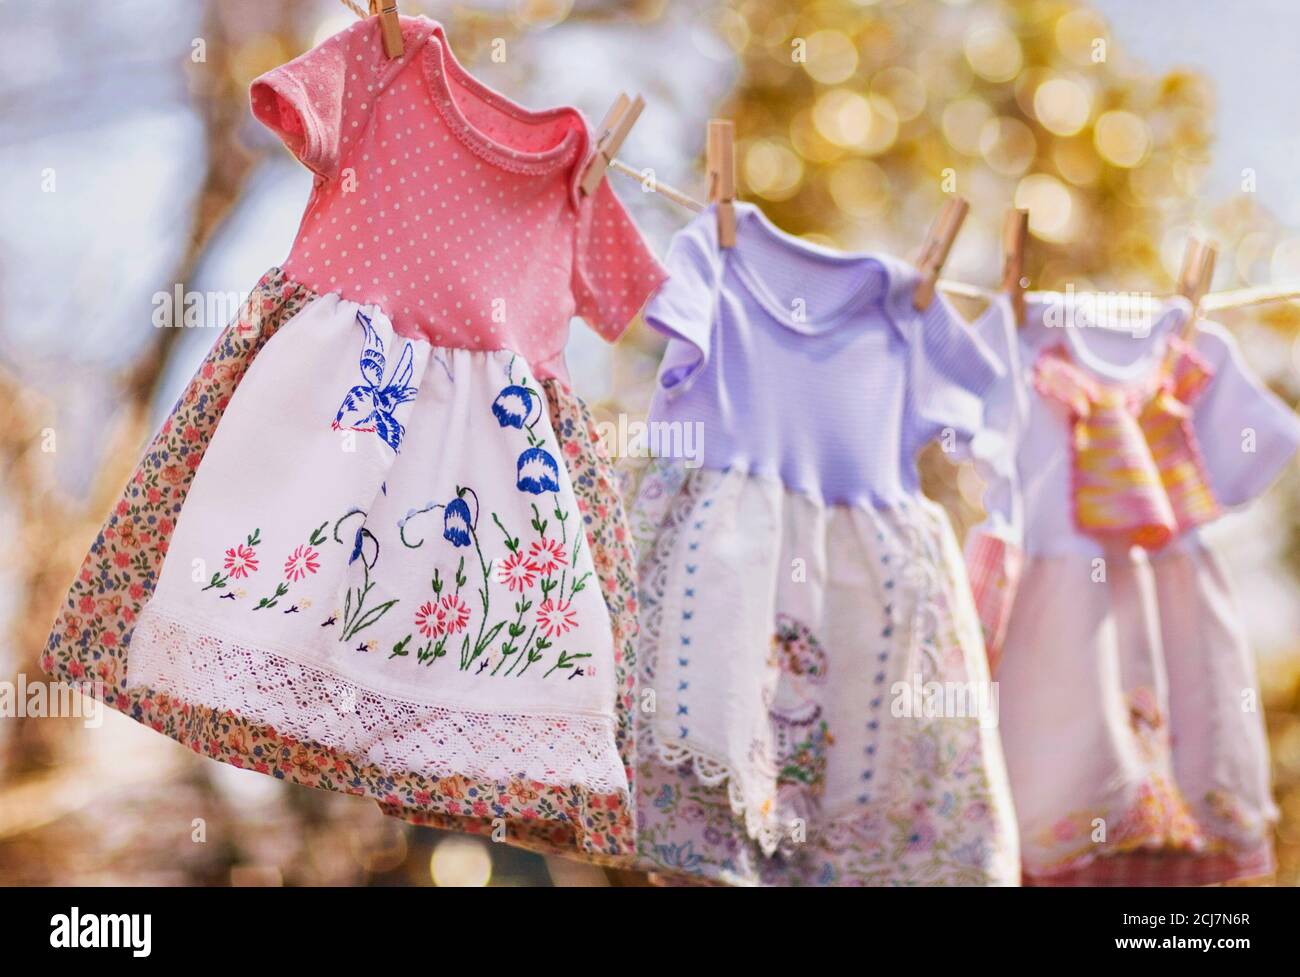 Young girl's vintage dresses on a clothesline outdoors Stock Photo - Alamy